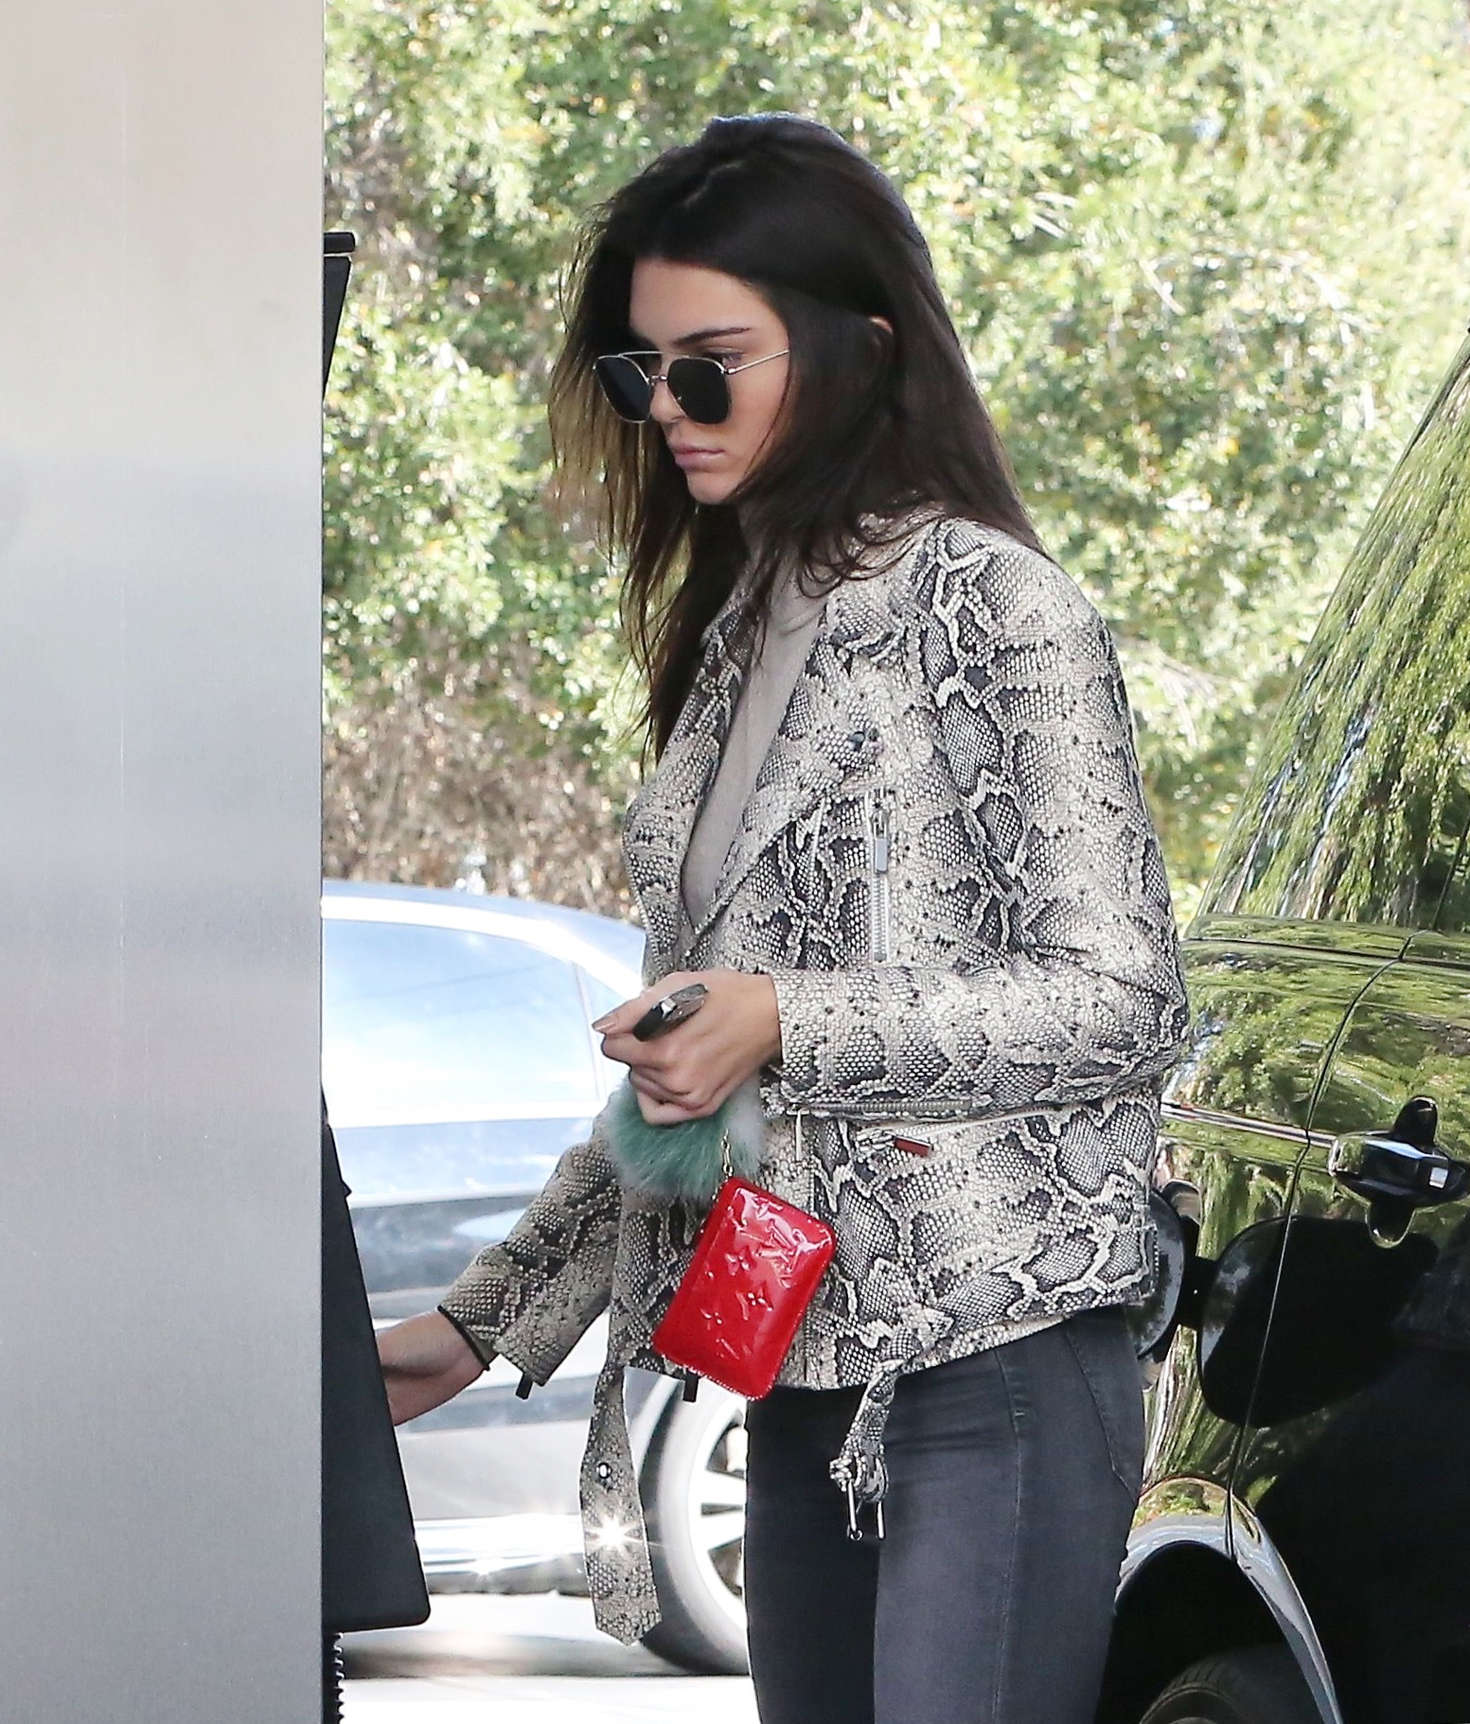 Kendall Jenner pumping gas 28